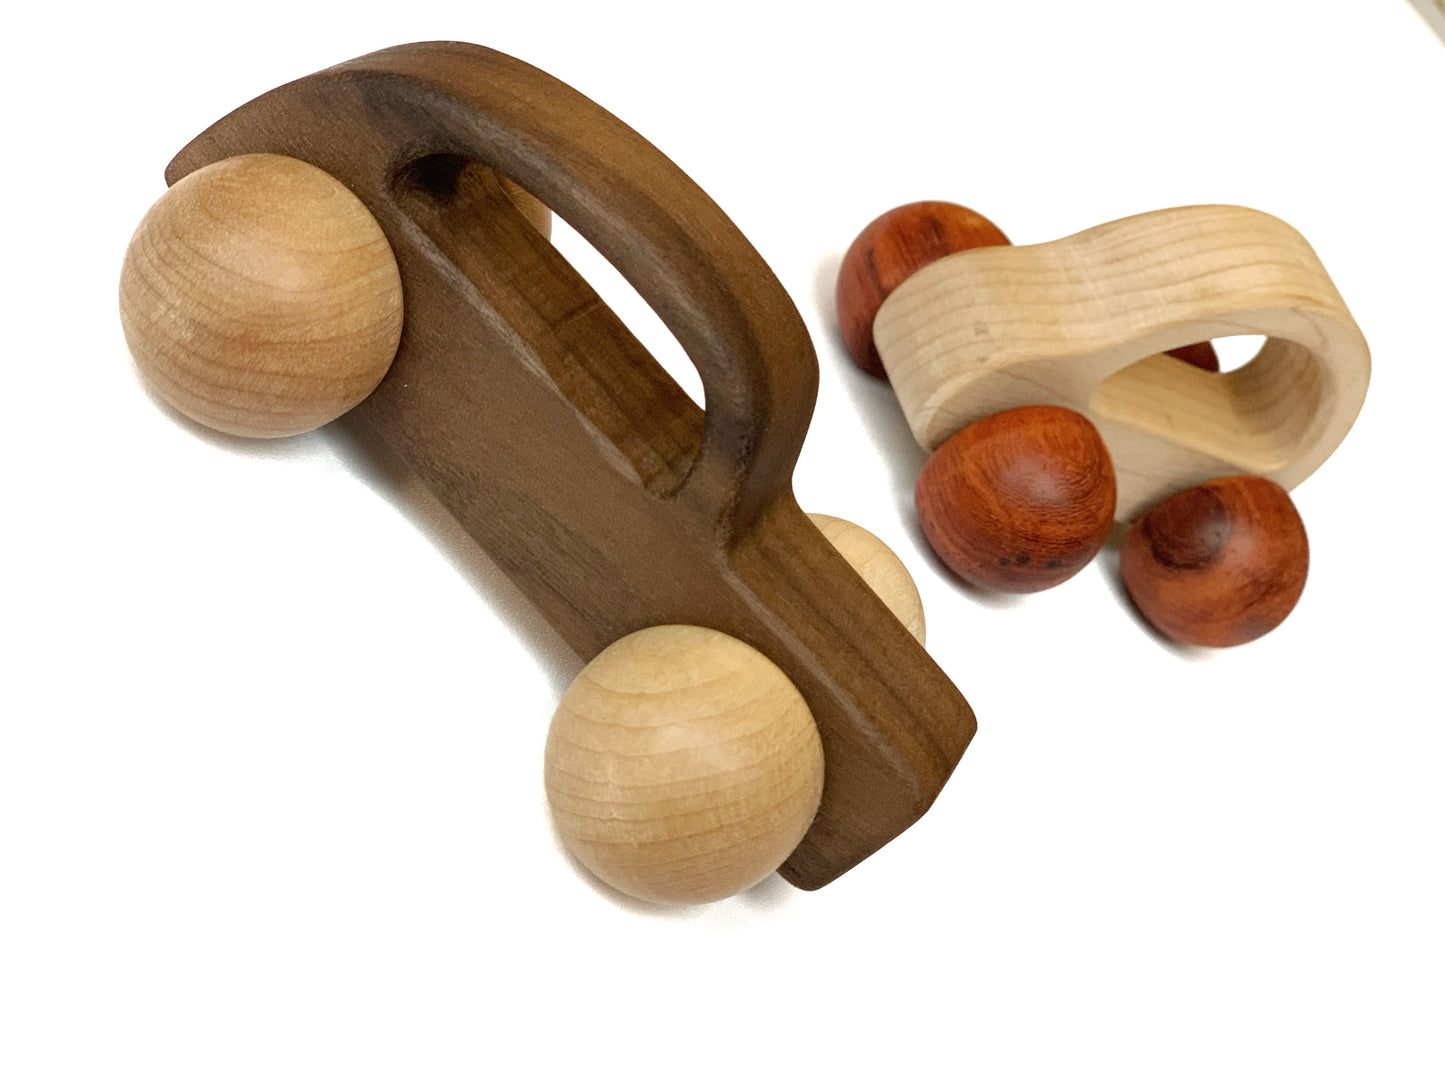 Maple mahogany wheel car - My first wooden toy